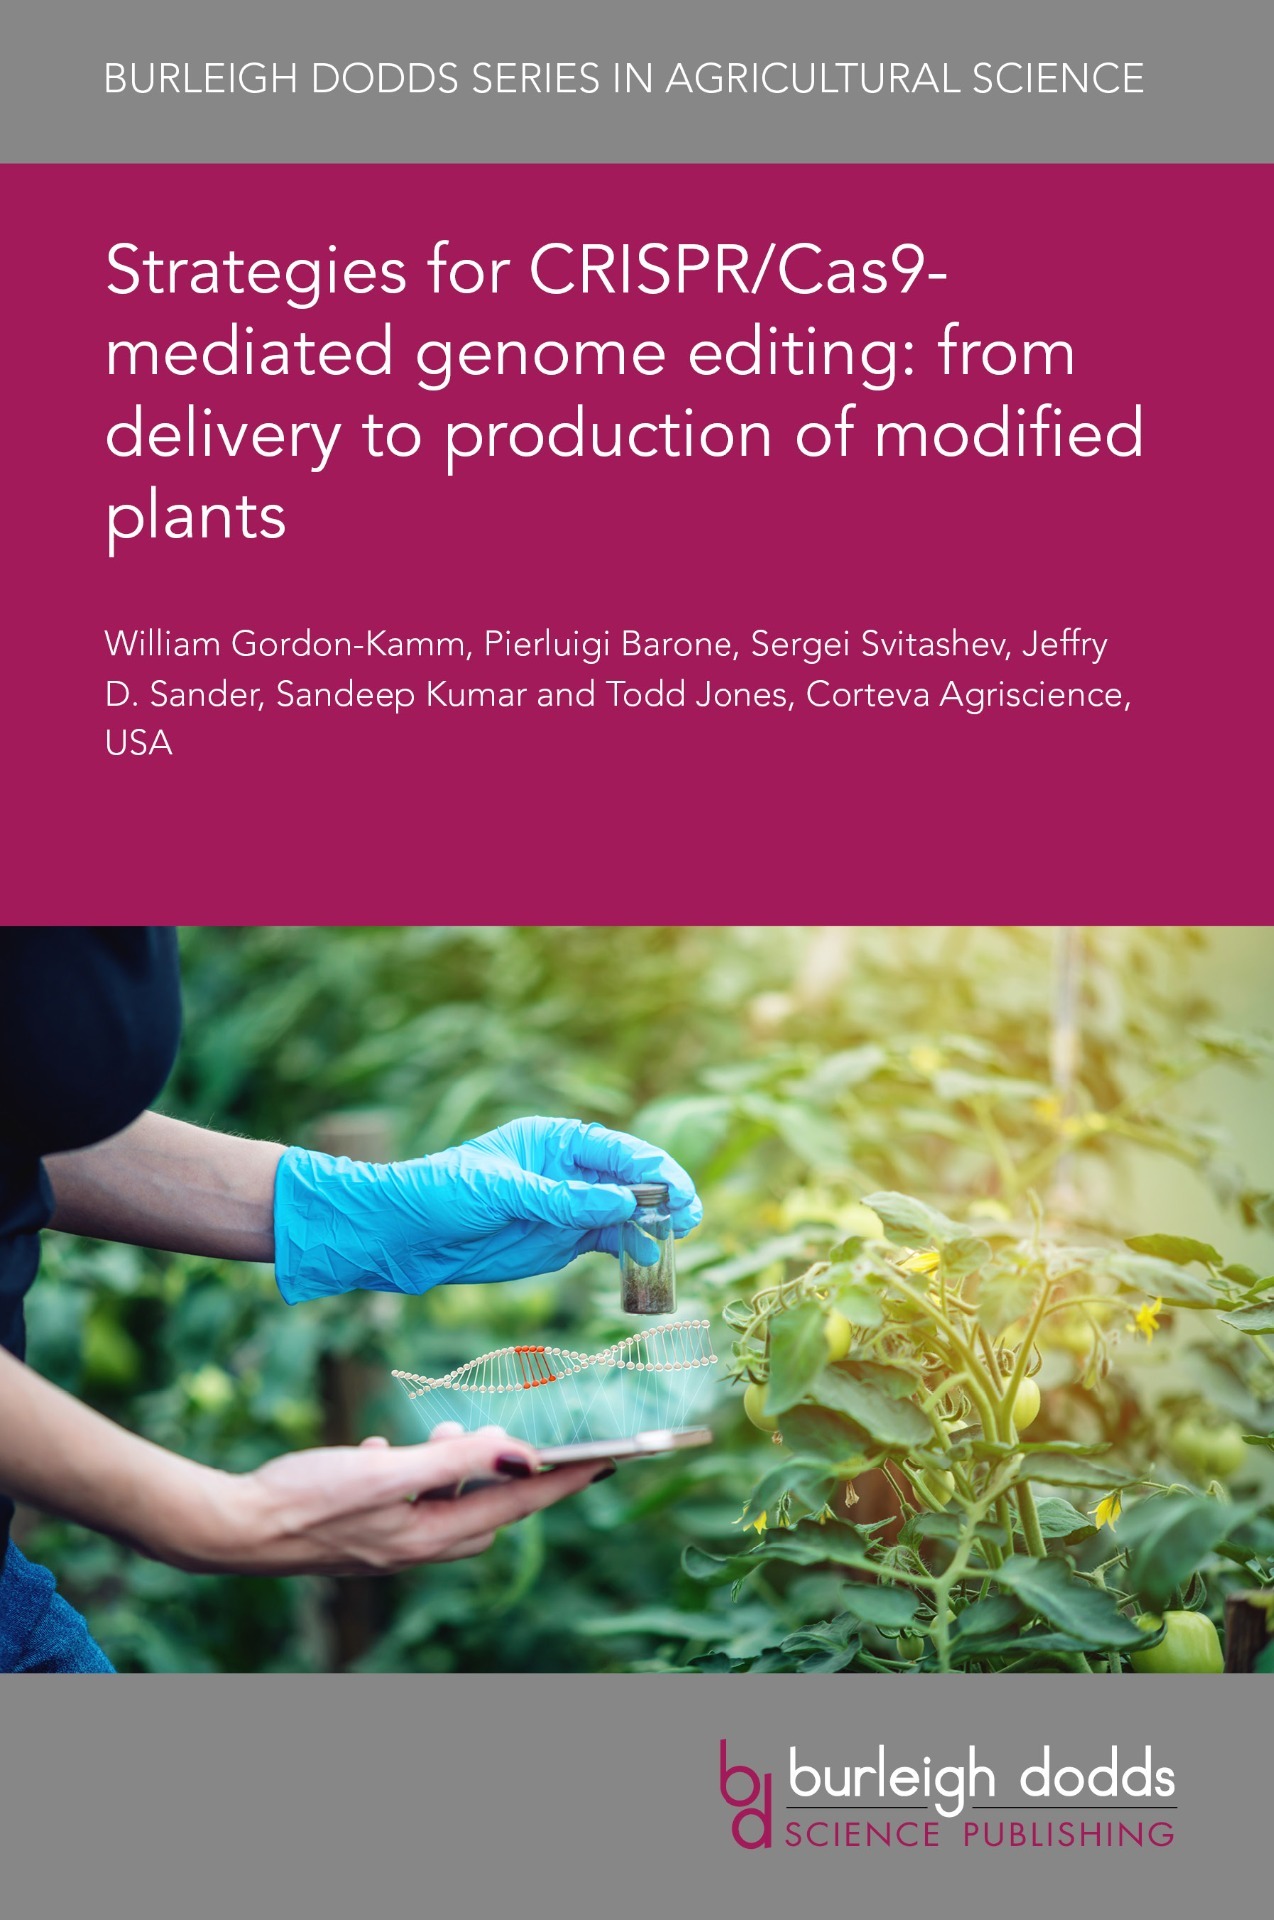 Strategies for CRISPR/Cas9-mediated genome editing: from delivery to production of modified plants